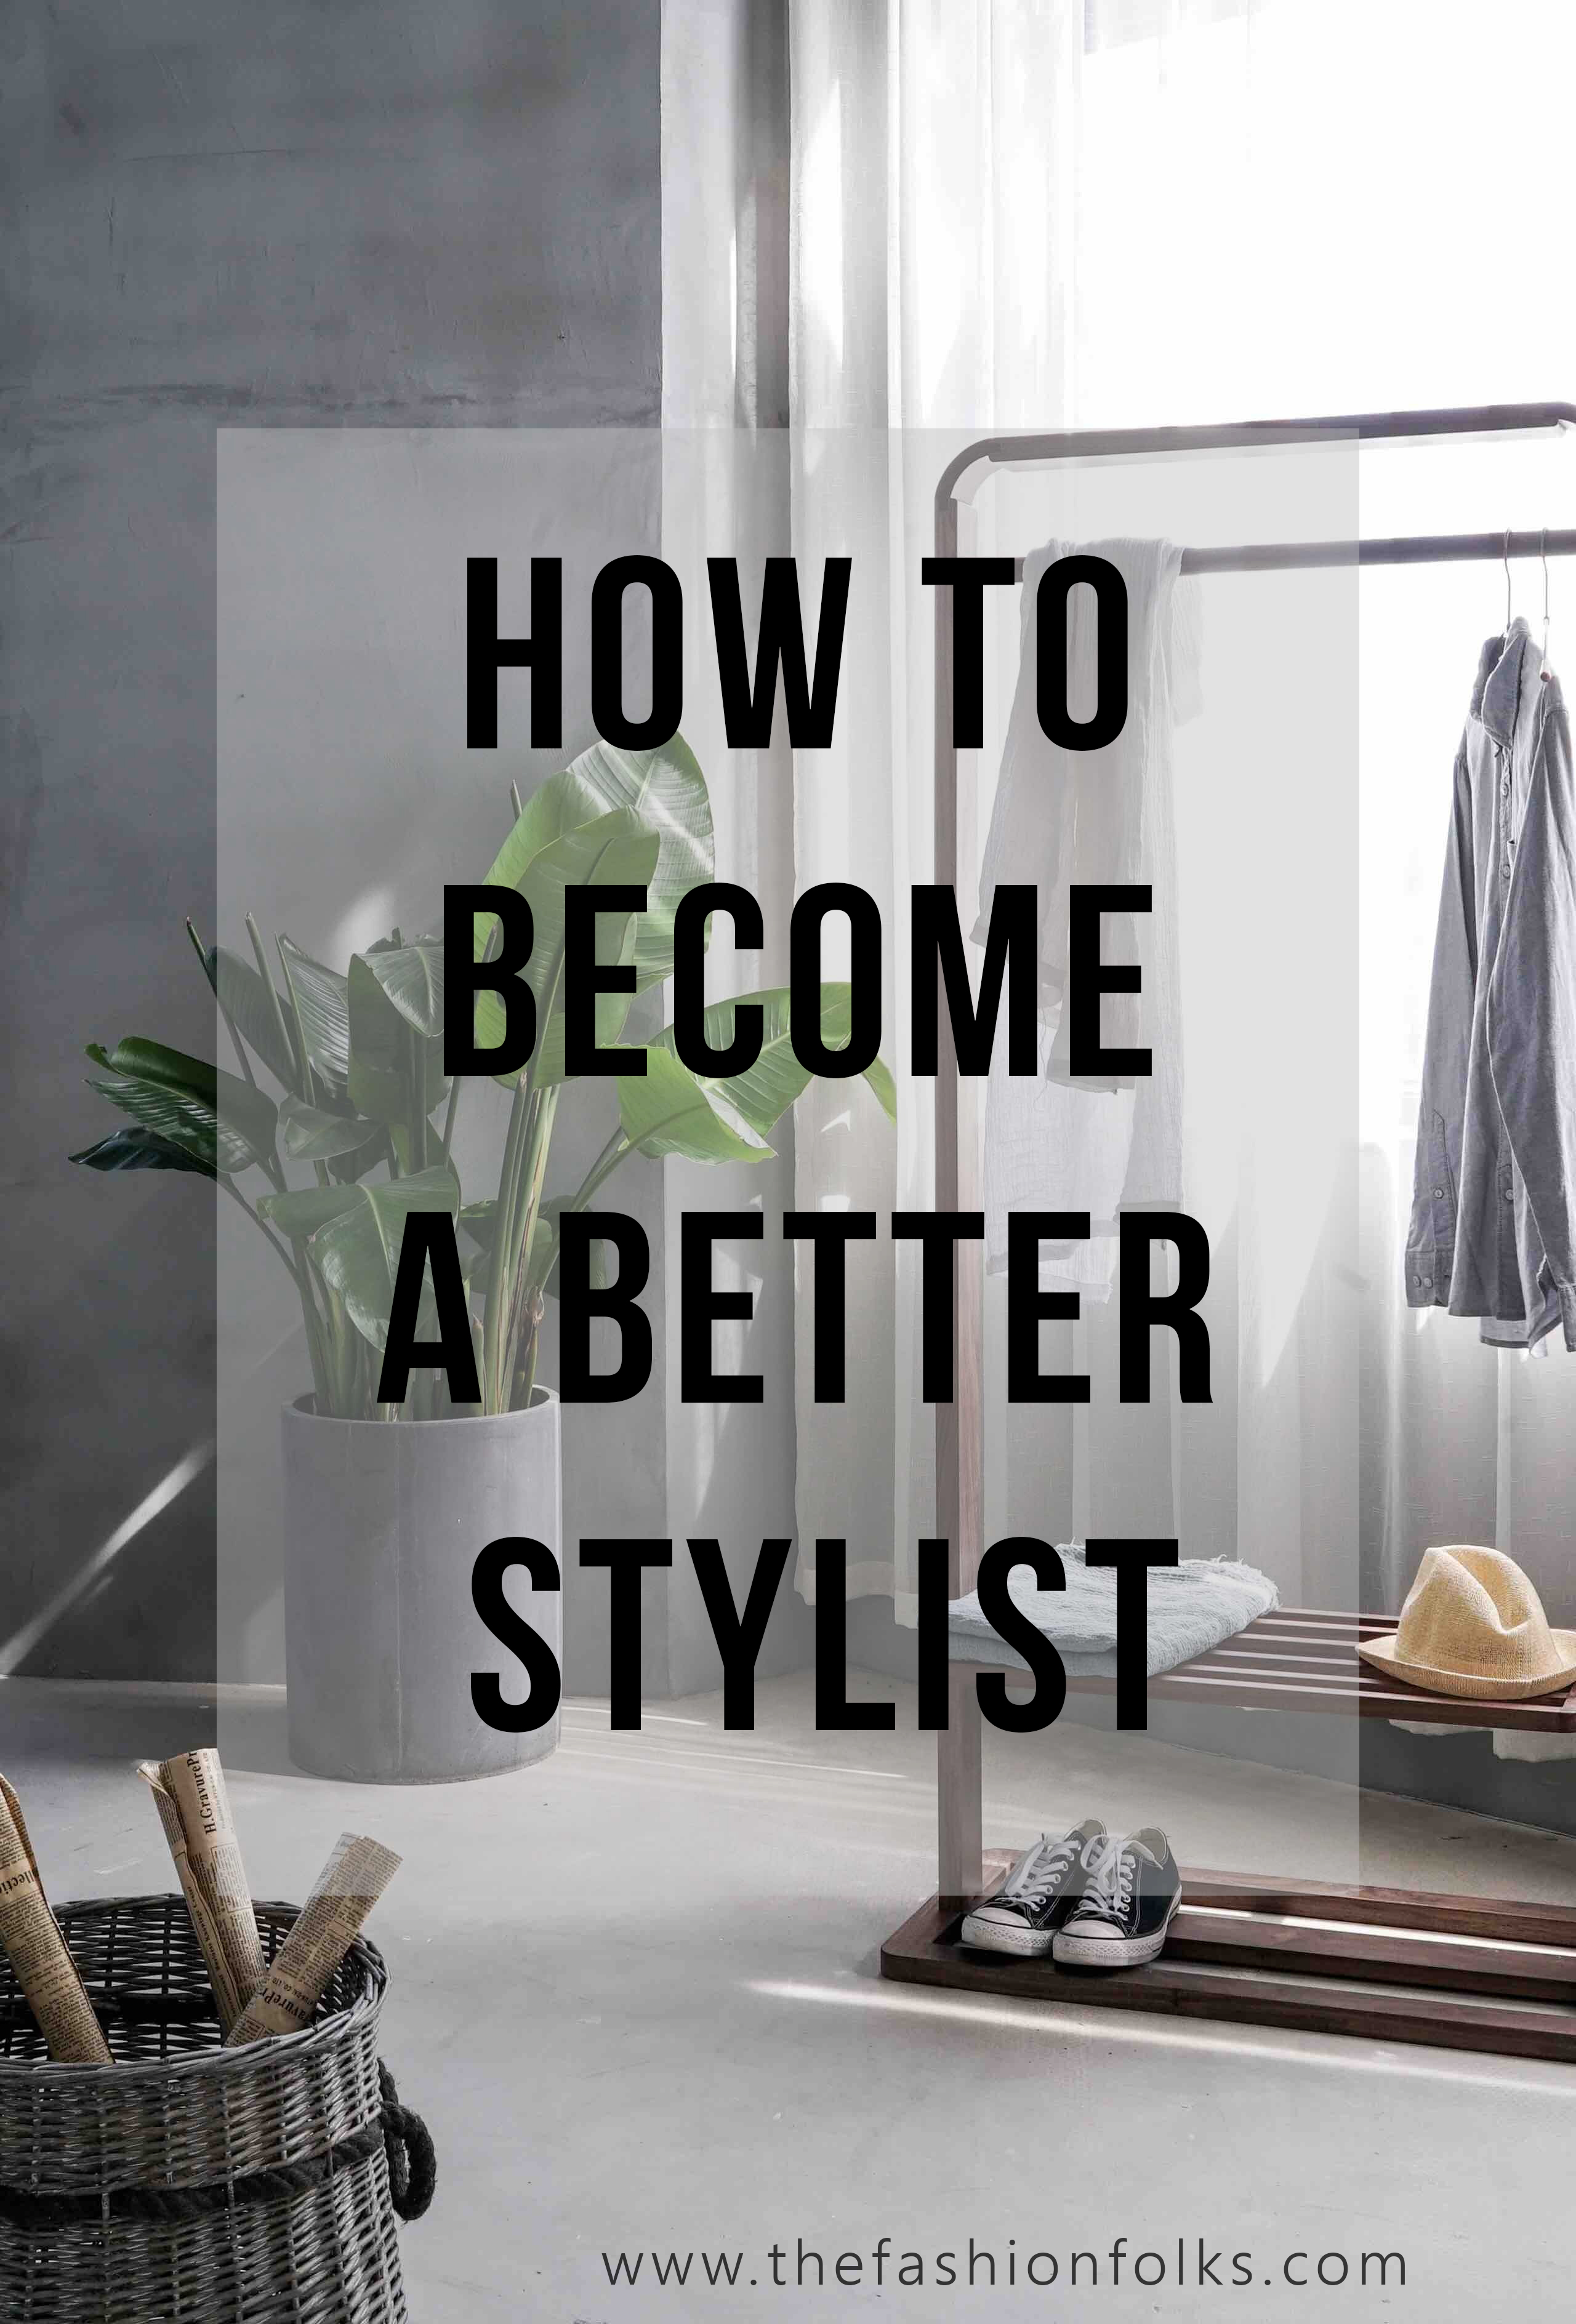 How To Become A Better Stylist